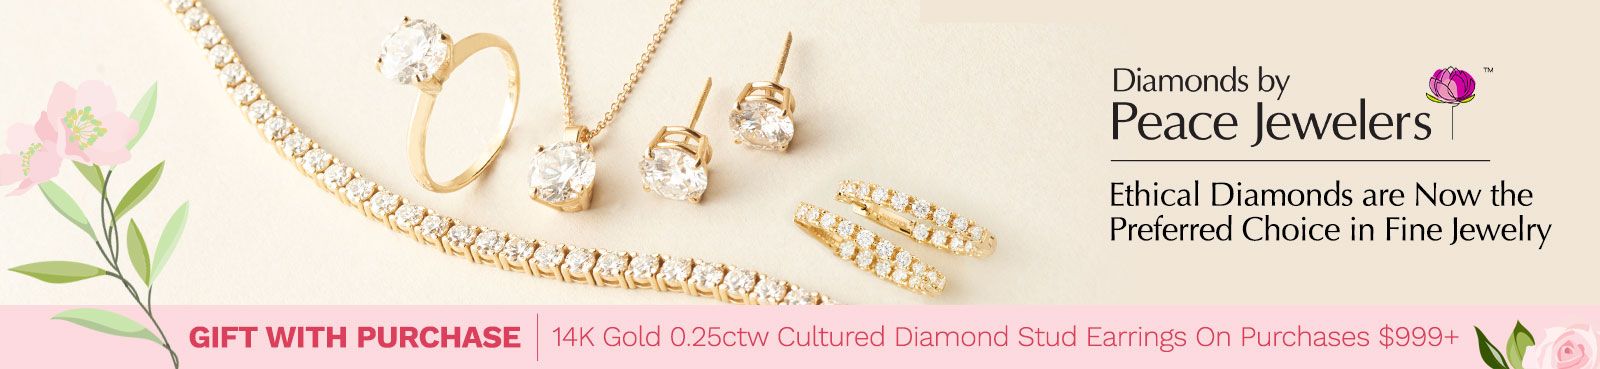 Peace Jewelers  Cultured Diamonds are Now the Preferred Choice in Fine Jewelry : Gift with Purchase on Orders $999+ 14K Gold 0.25ctw Cultured Diamond Stud Earrings ($249 Value)